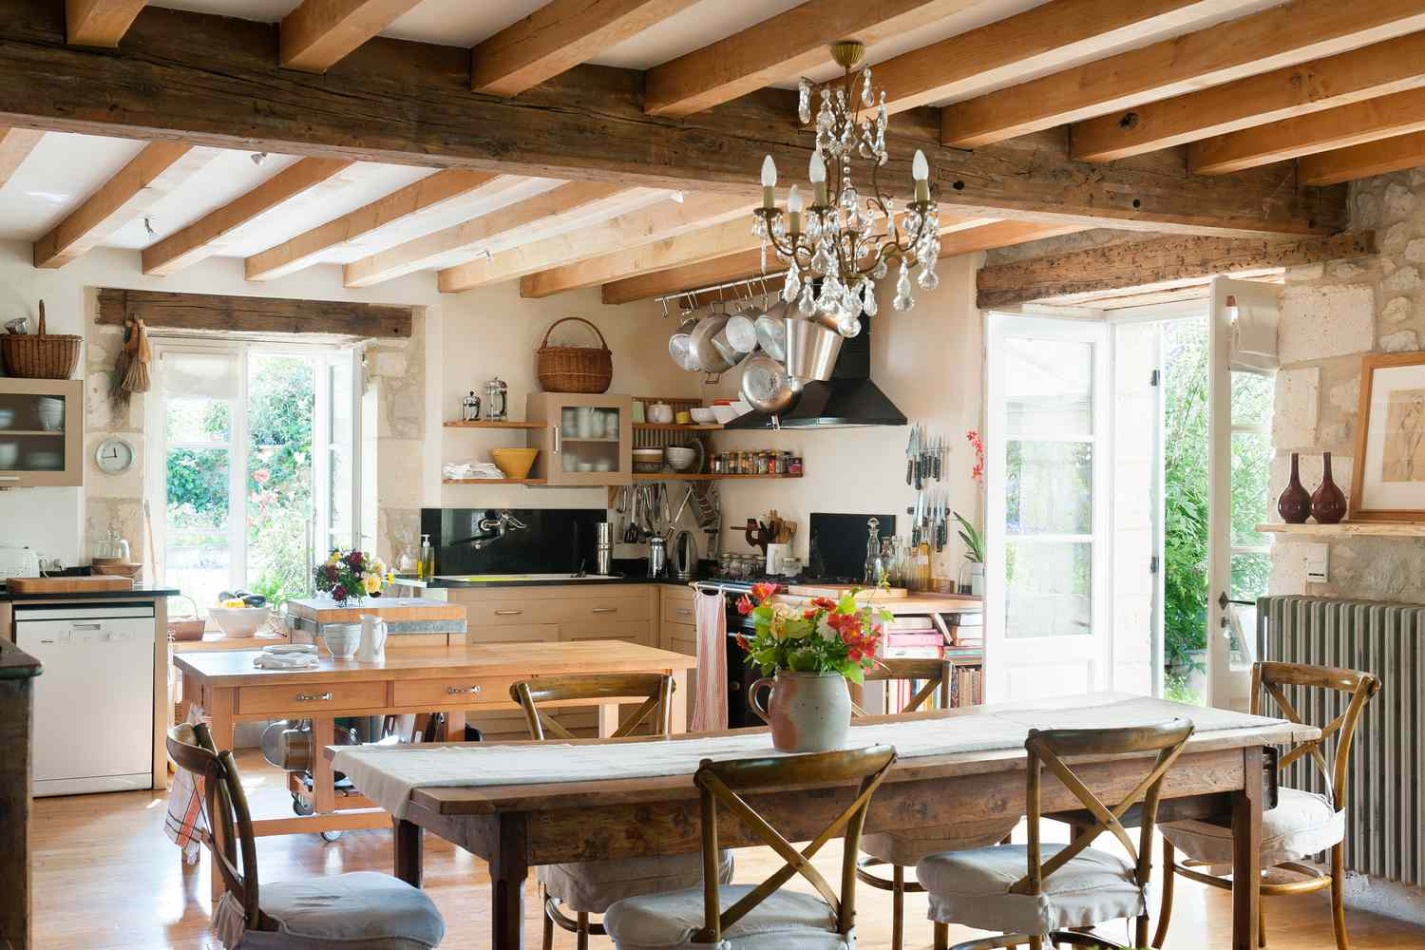 Charming And Chic: French Countryside Interior Design Inspiration